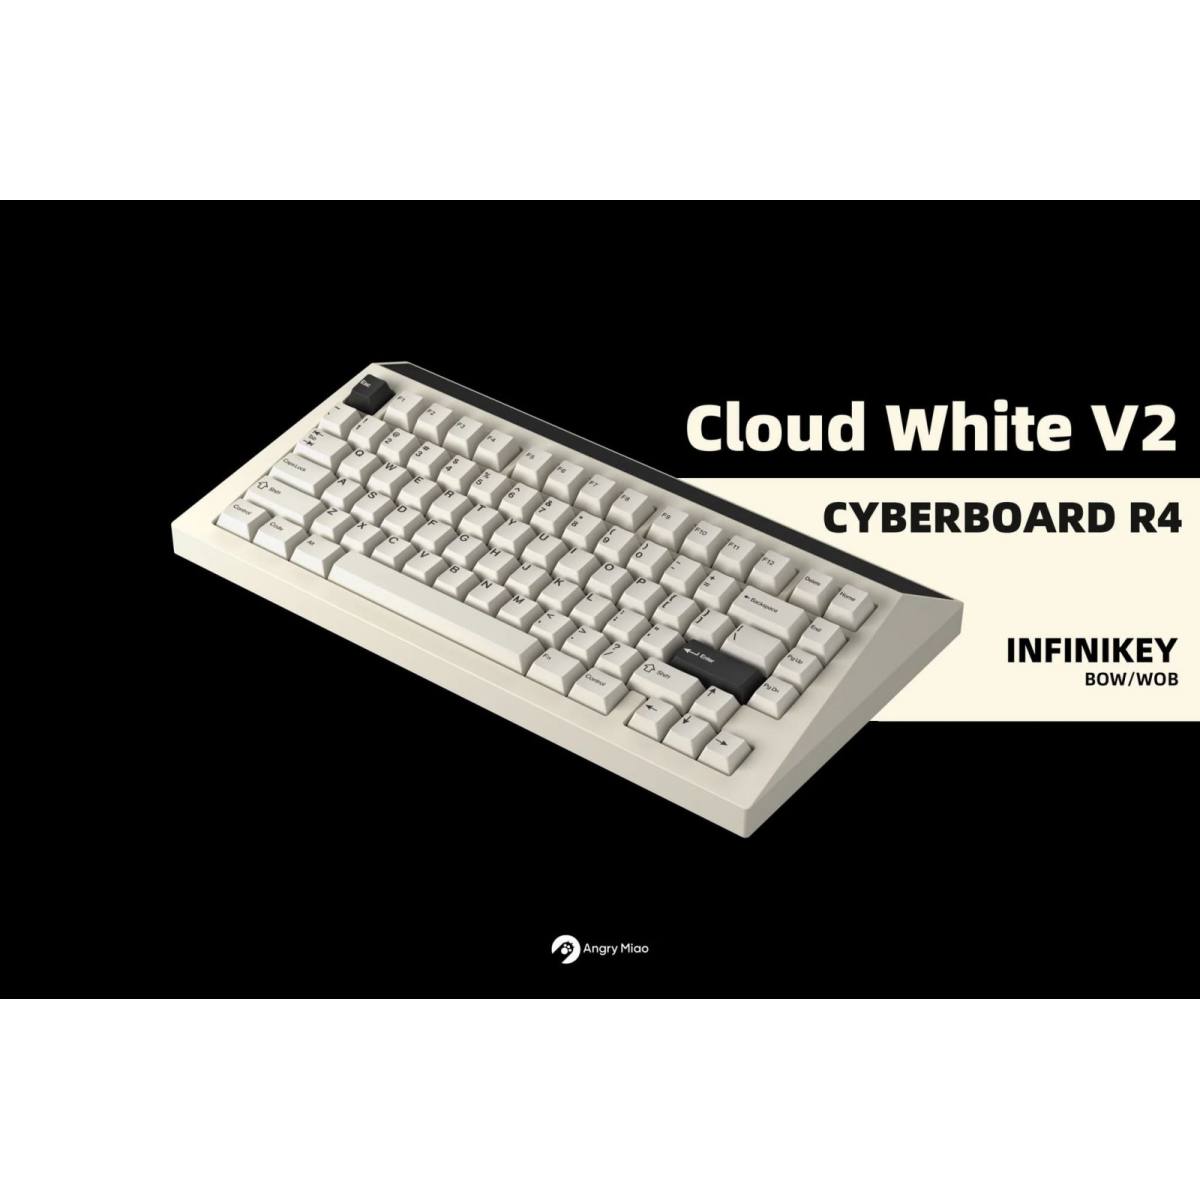 Base KIT Angry Miao Cyberboard R4 Cloud White V2